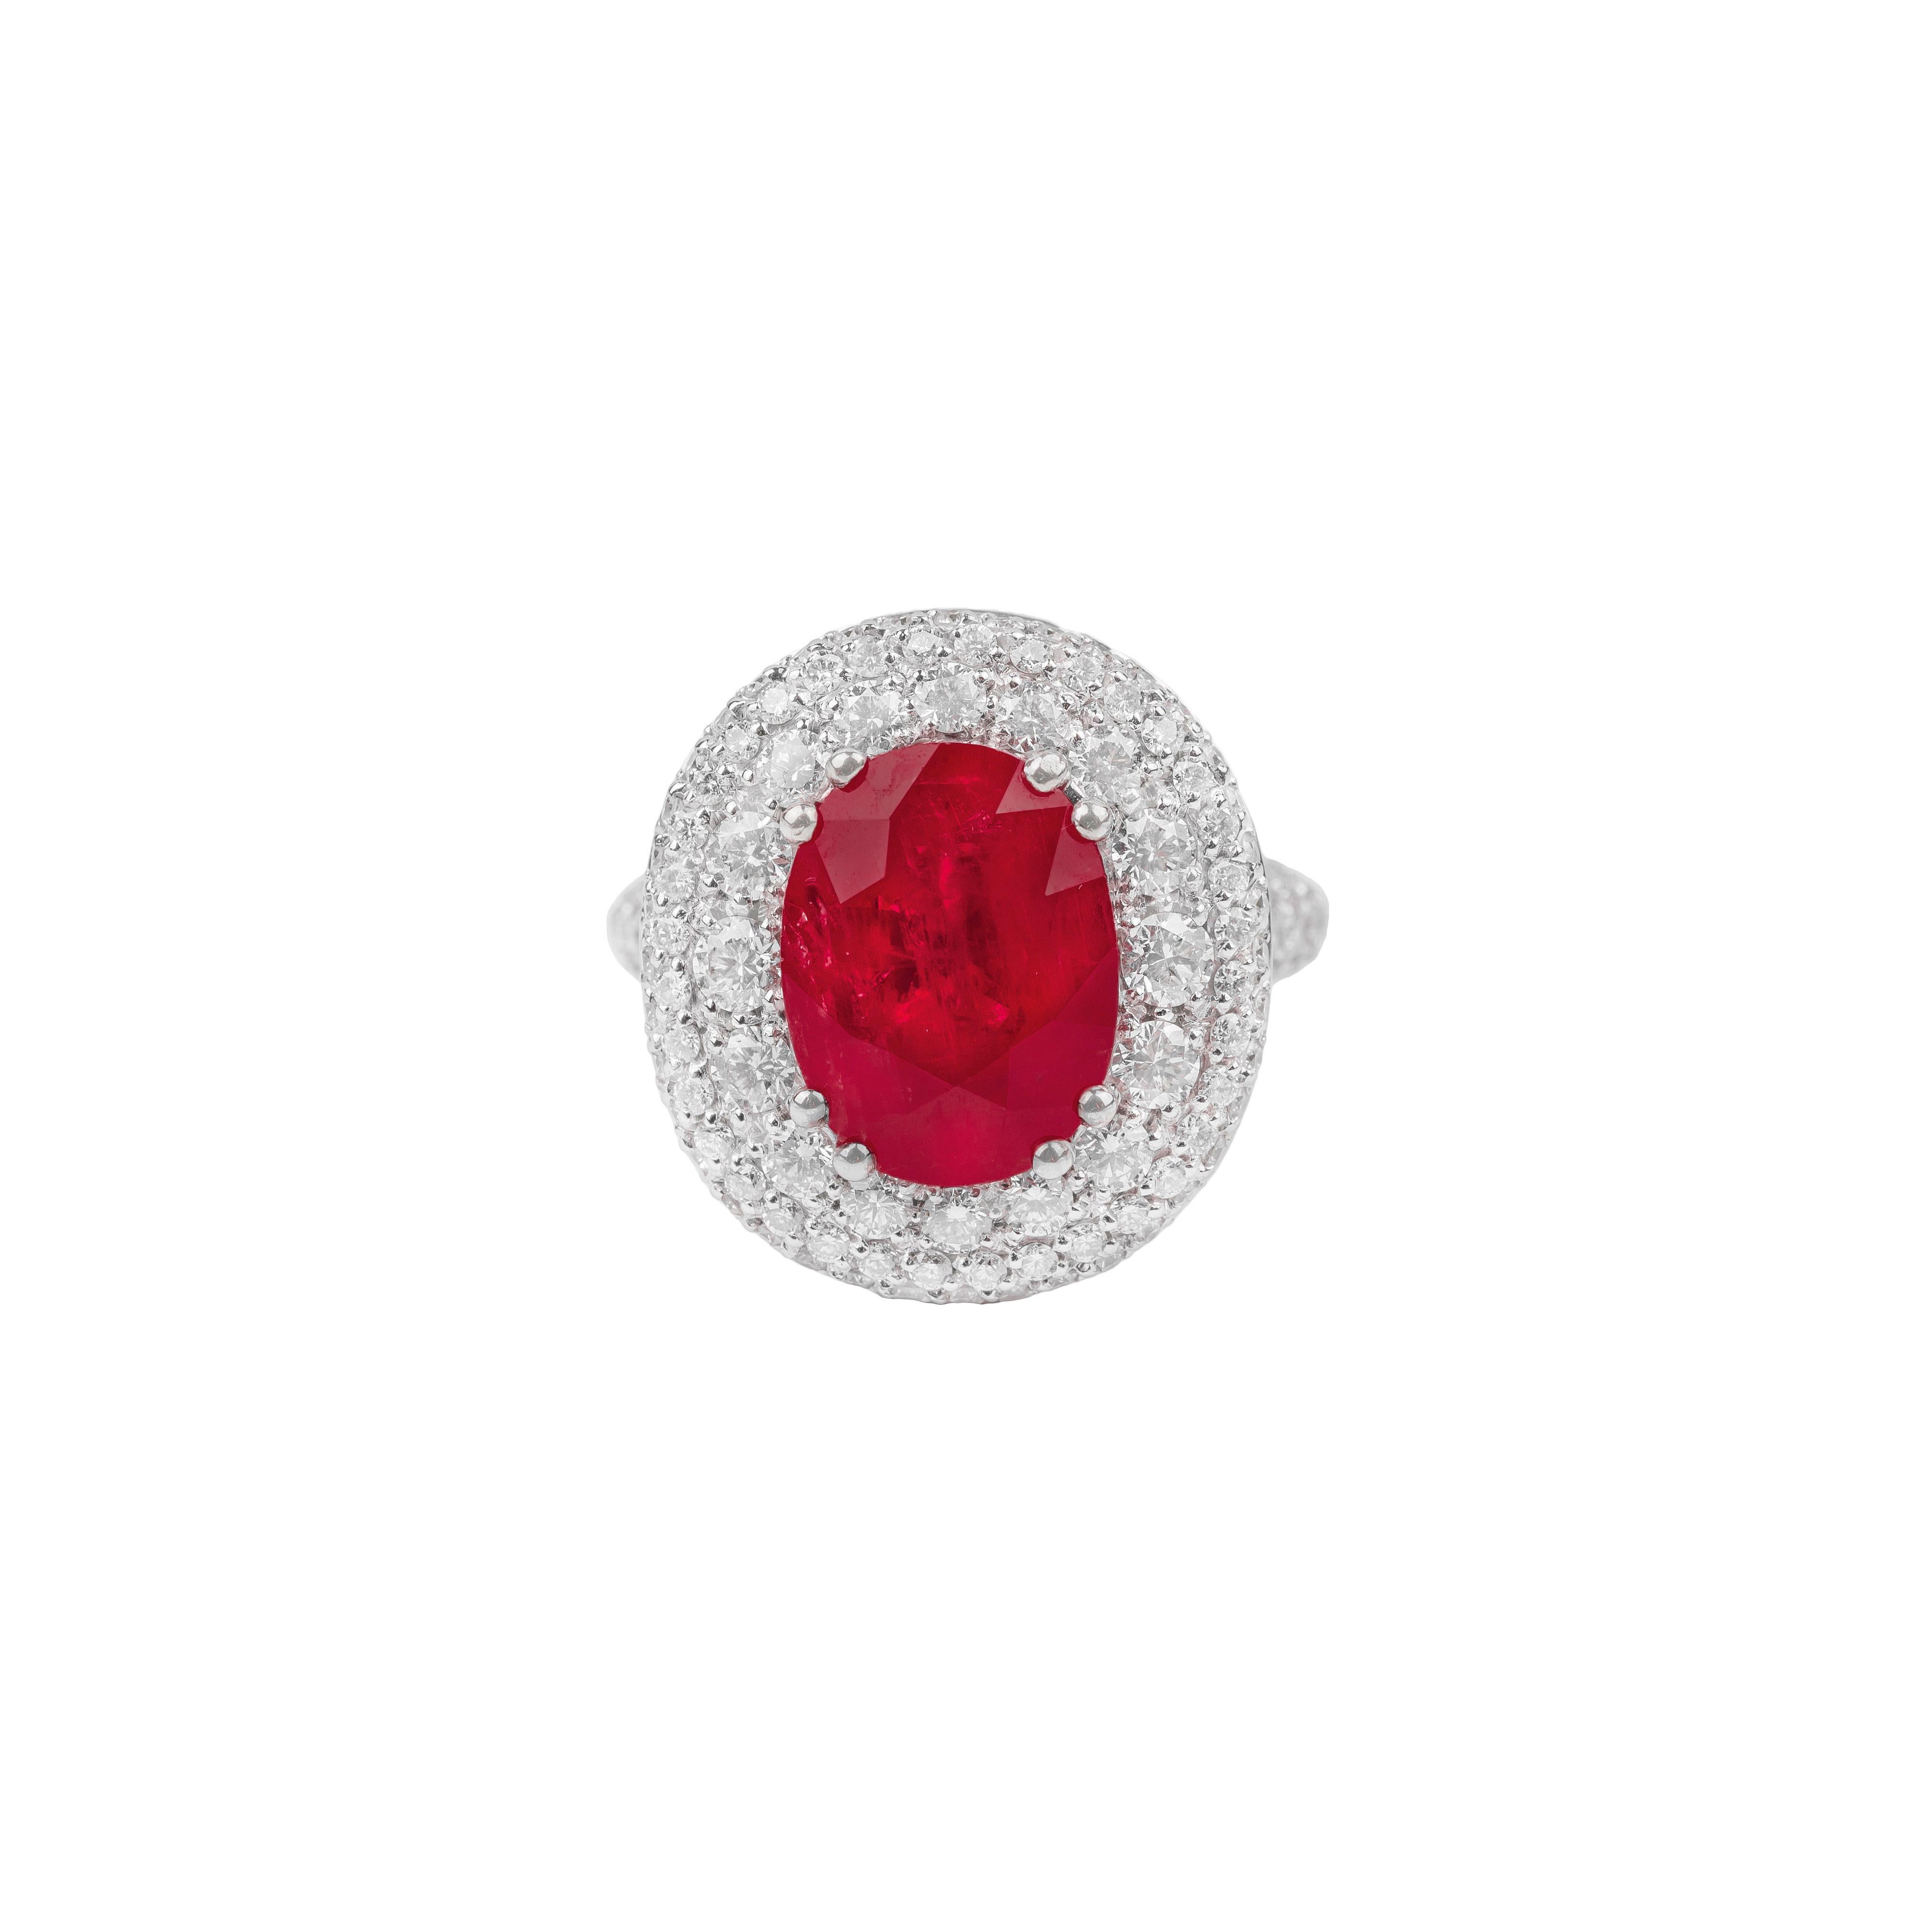 For Sale:  18k White Gold, Ruby and White Diamonds Ring IGN Certificate 2